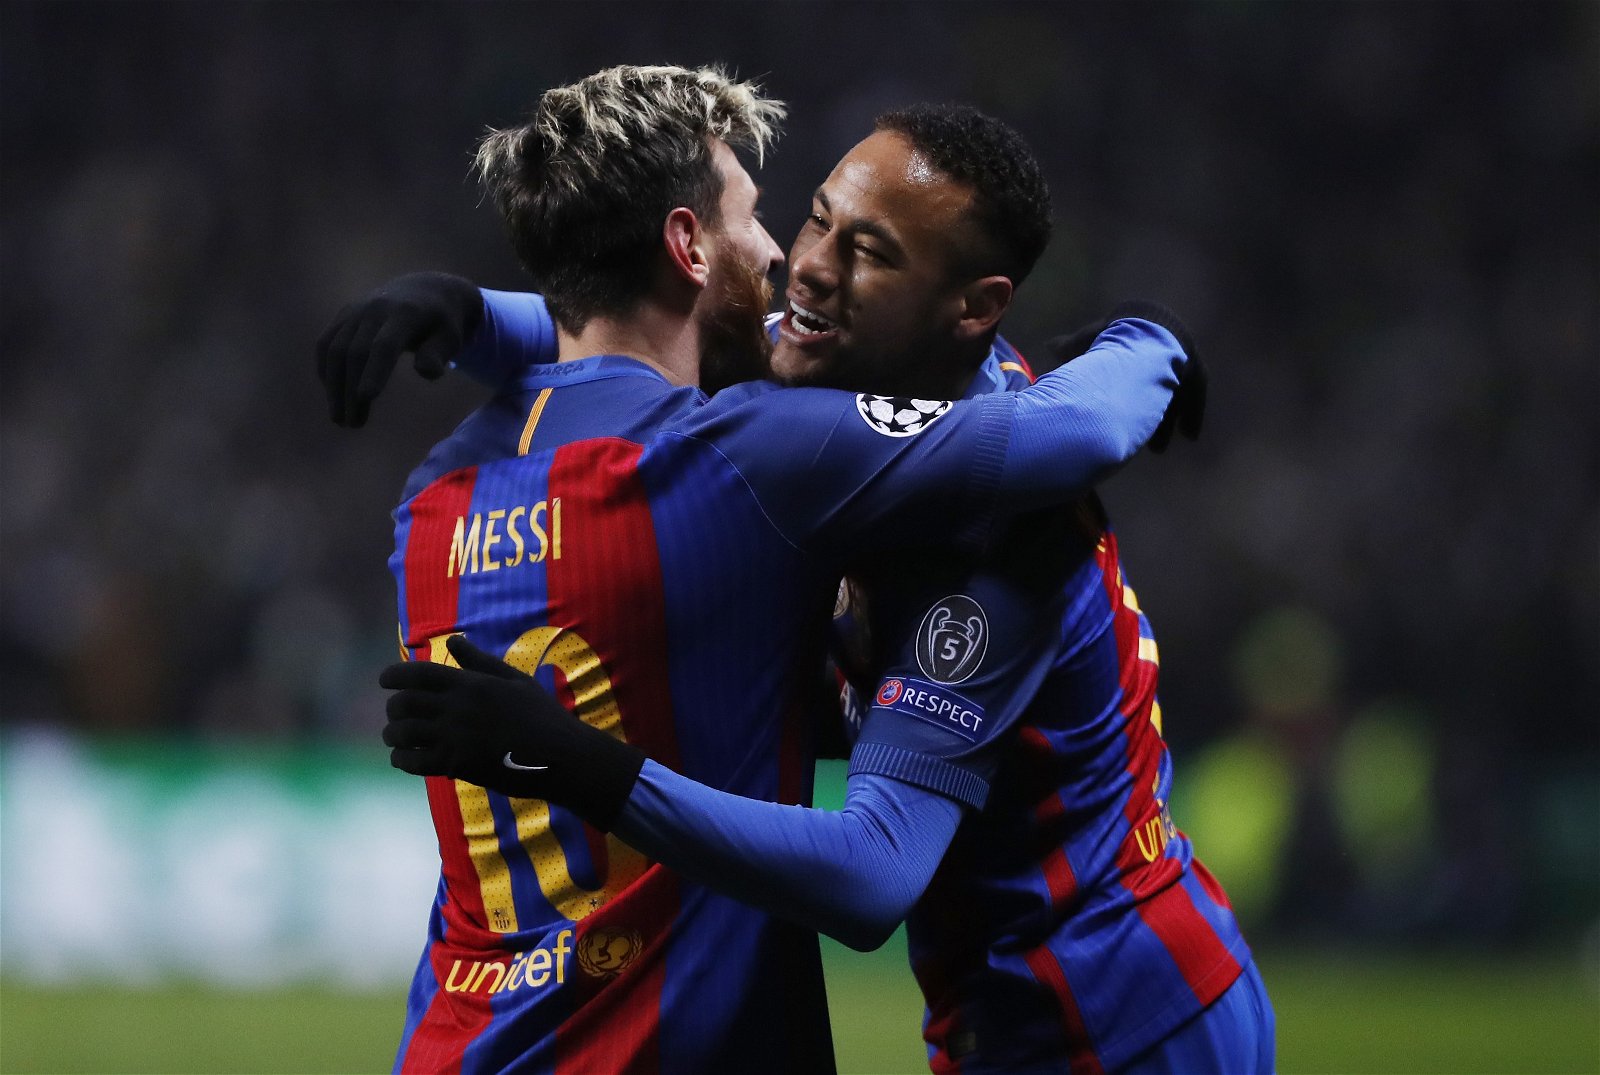 Barcelona superstar Lionel Messi feared Neymar would join rivals Real Madrid